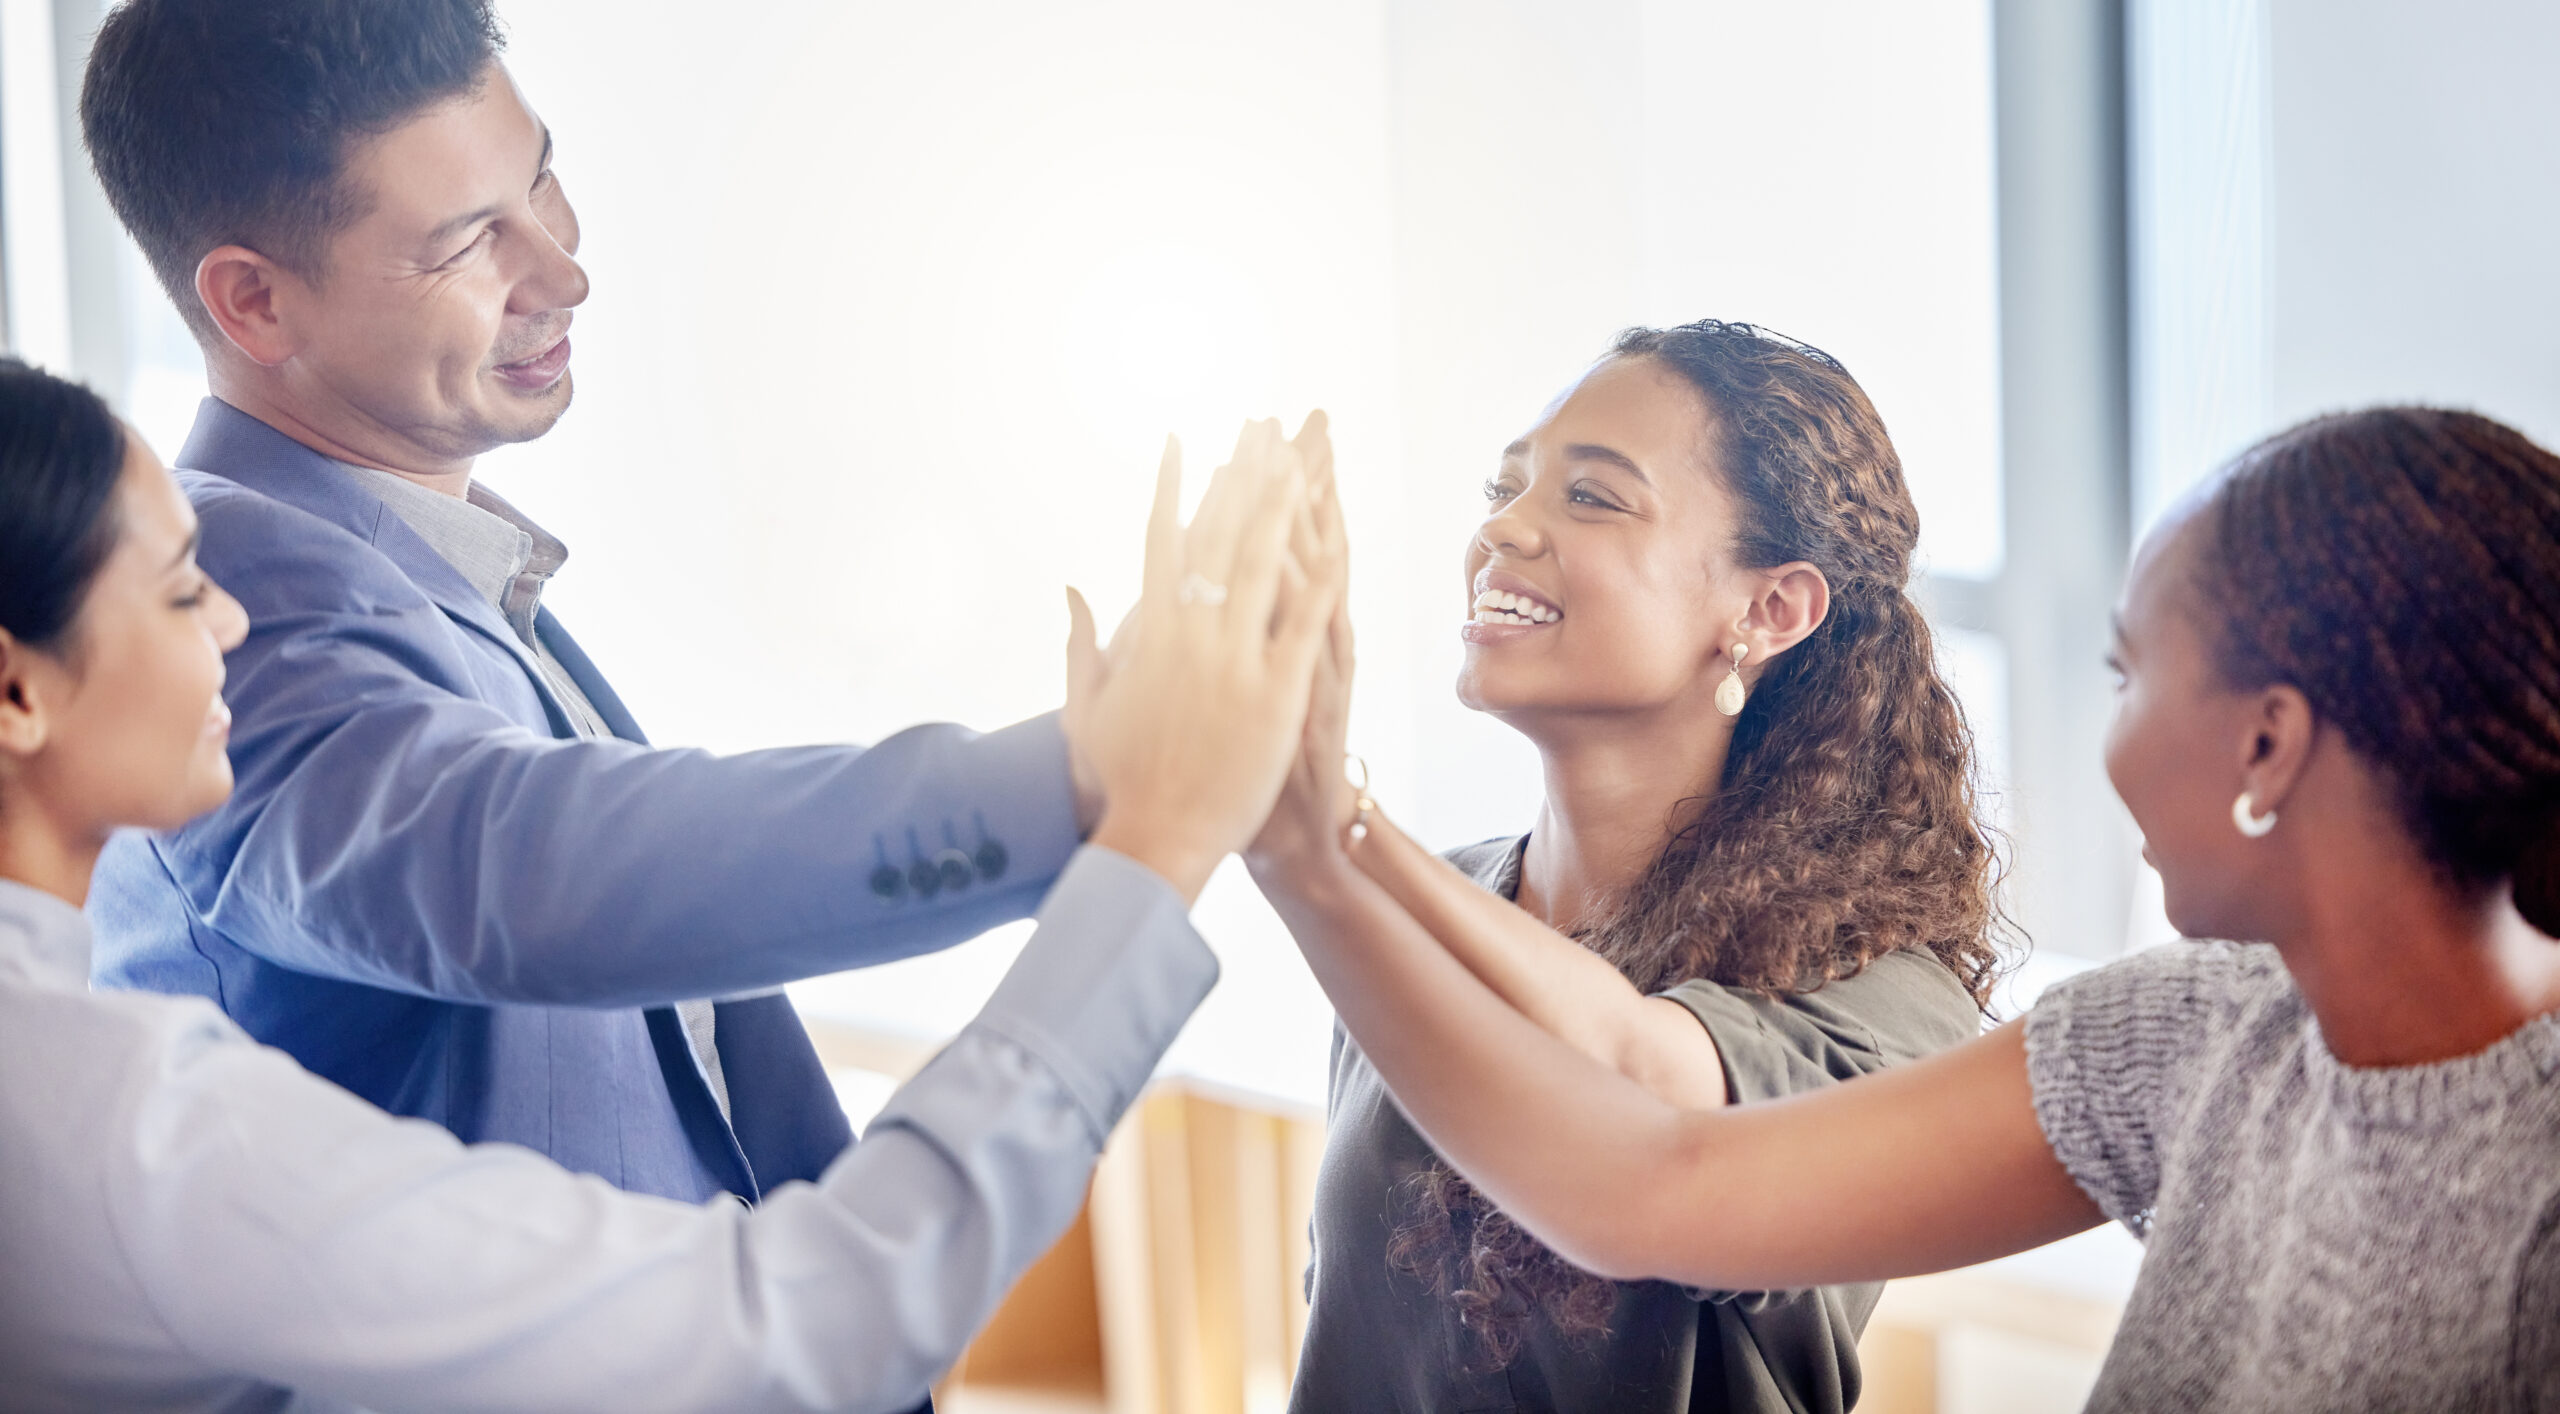 Business people, meeting and high five in team building, agreement or collaboration in unity at the office. Happy group of employees touching hands in teamwork, motivation or celebration for goals.